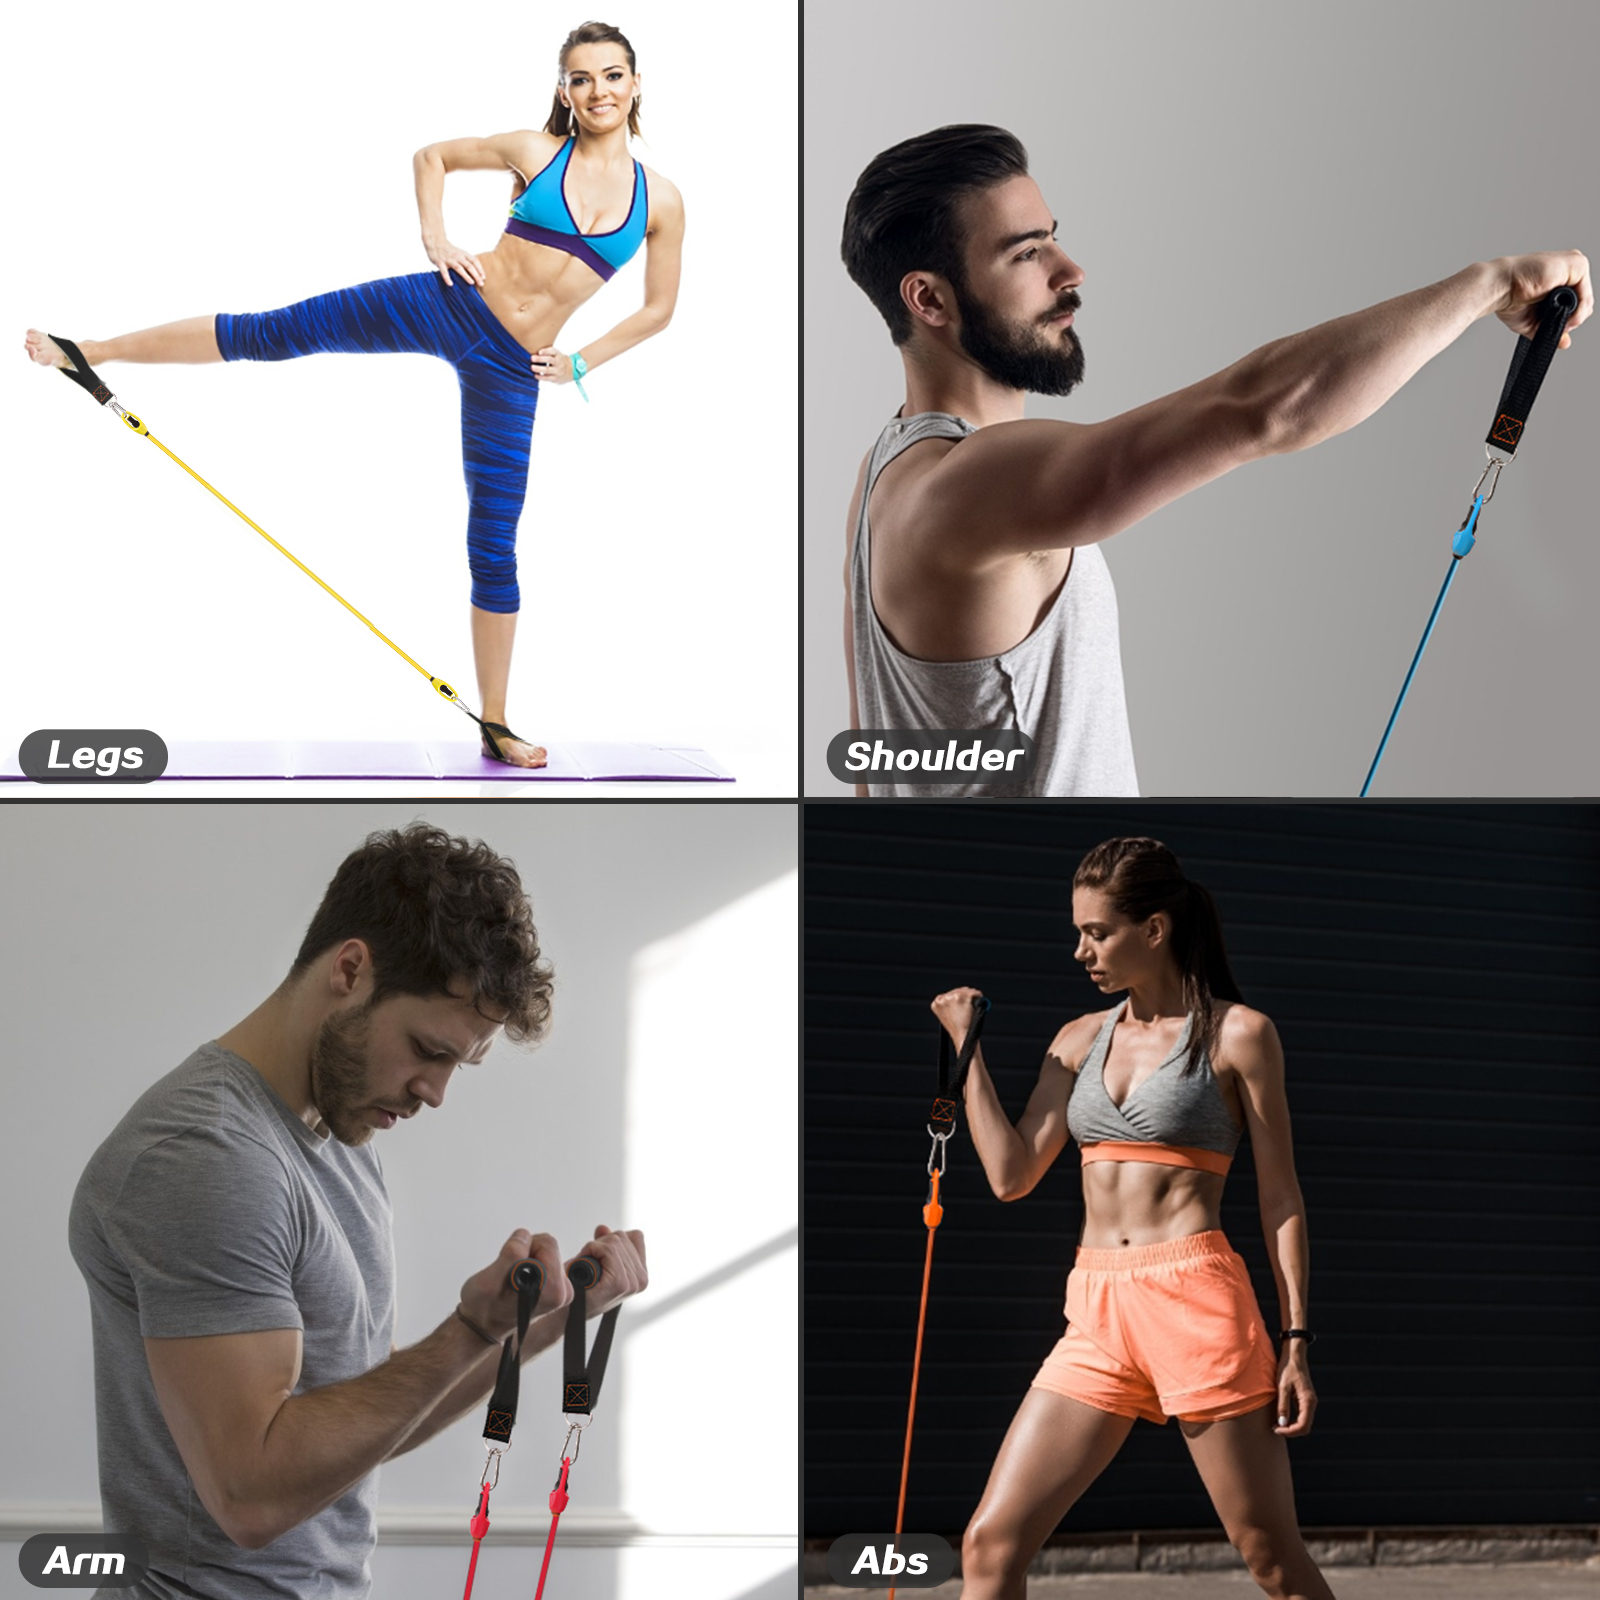 13-Pcs-160lbs-Resistance-Bands-Set-with-Non-Slip-Handle-Door-Anchor-Legs-Ankle-Straps-Fitness-Gym-Mu-1894516-7